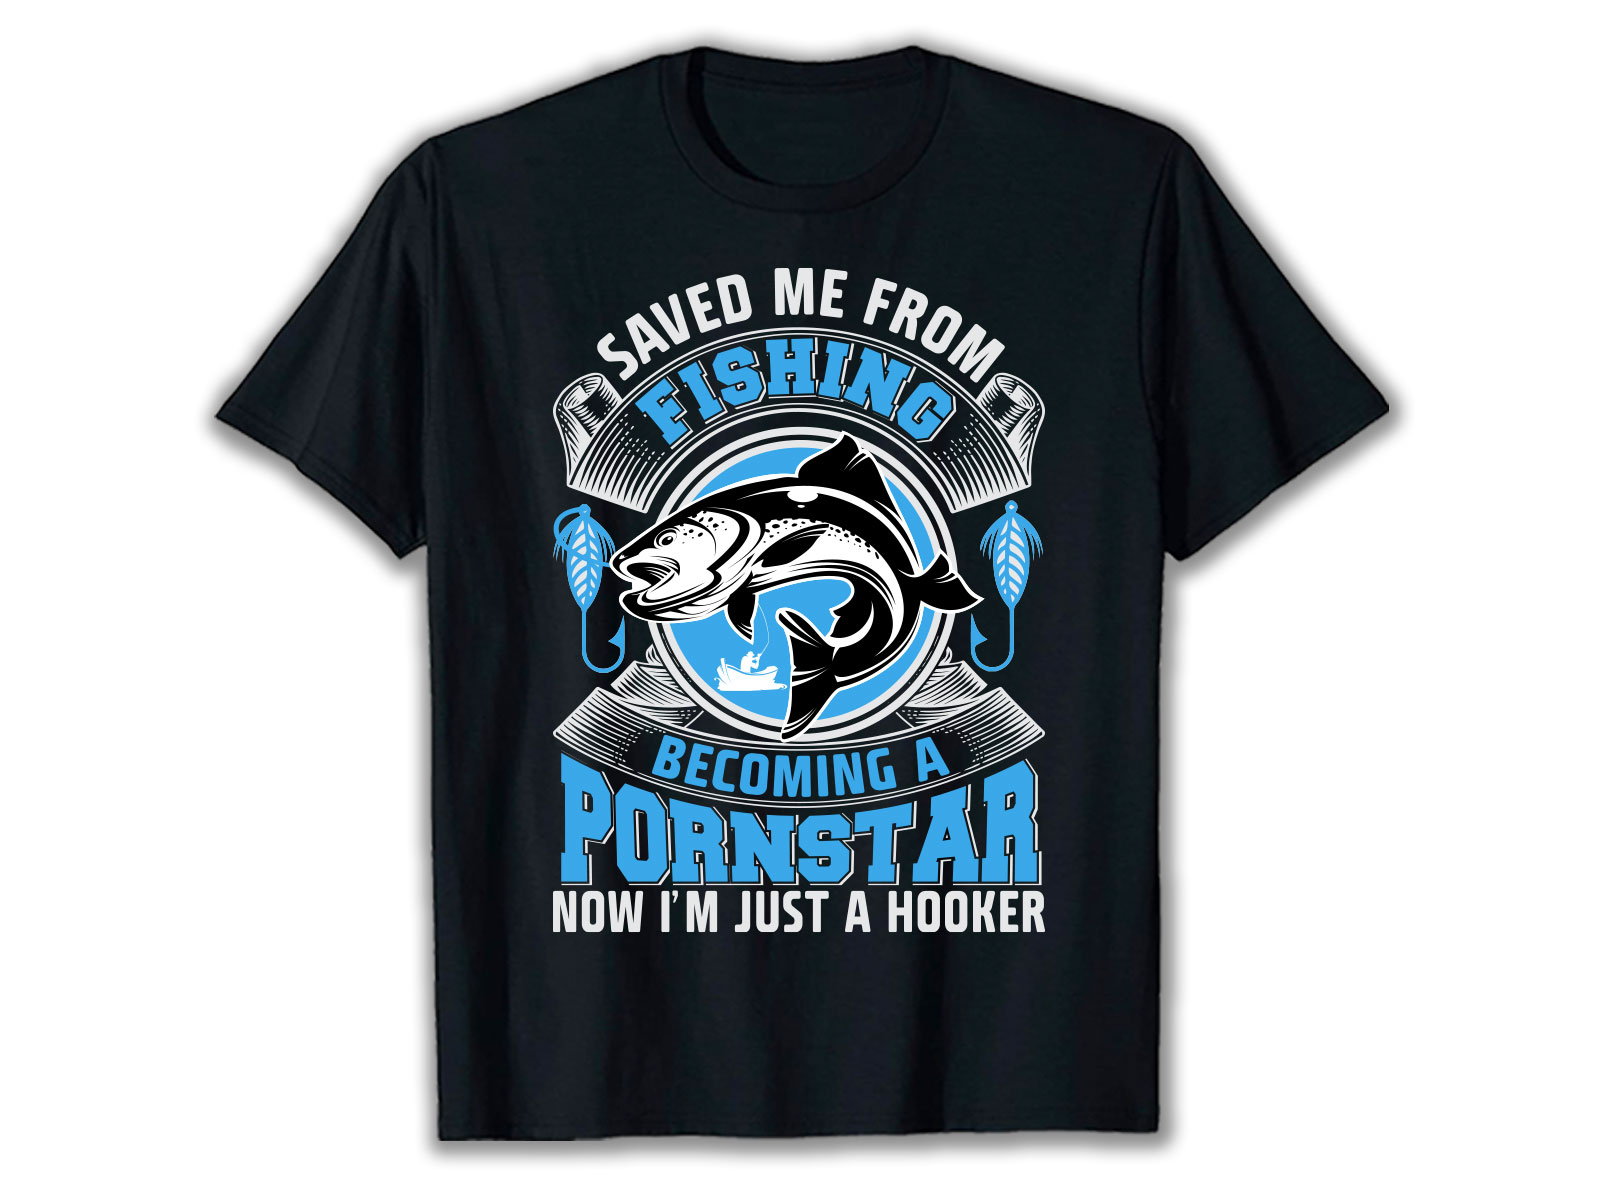 Saved Me From Fishing Becoming a Pornstar Now I'm Just a Hooker cheap fishing t shirts fishing is calling t shirt fishing lovers t shirt fishing t shirt club fishing t shirt design fishing t shirt ideas fishing t shirt monthly club fishing t shirt uk fishing t shirts fishing t shirts australia fishing t shirts brands fishing t shirts mens fishing t shirts uk fishing t-shirts brands fox fishing t shirt funny fishing t shirts graphic design ui